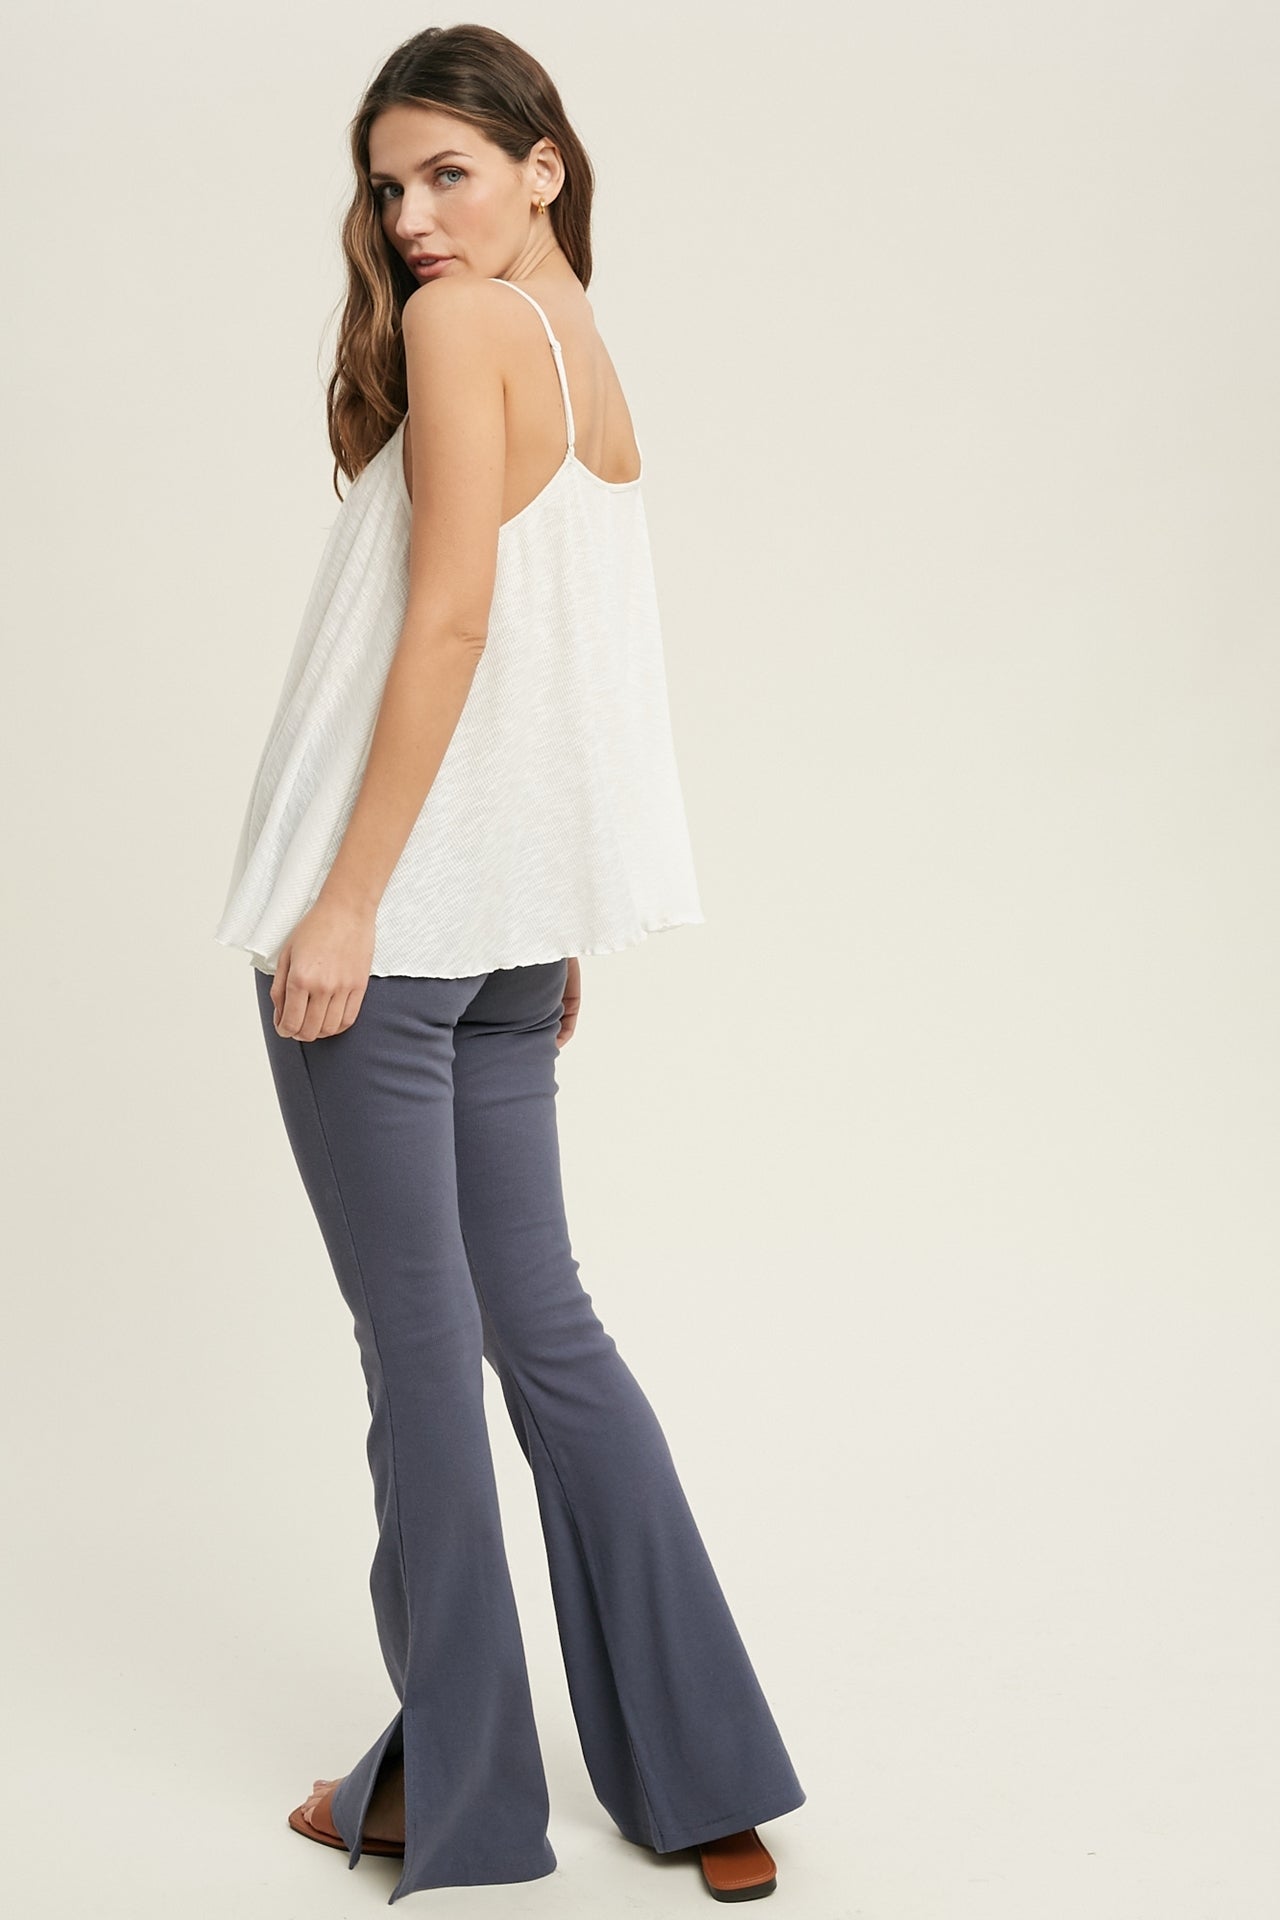 Ivory Button Up Flair Tank